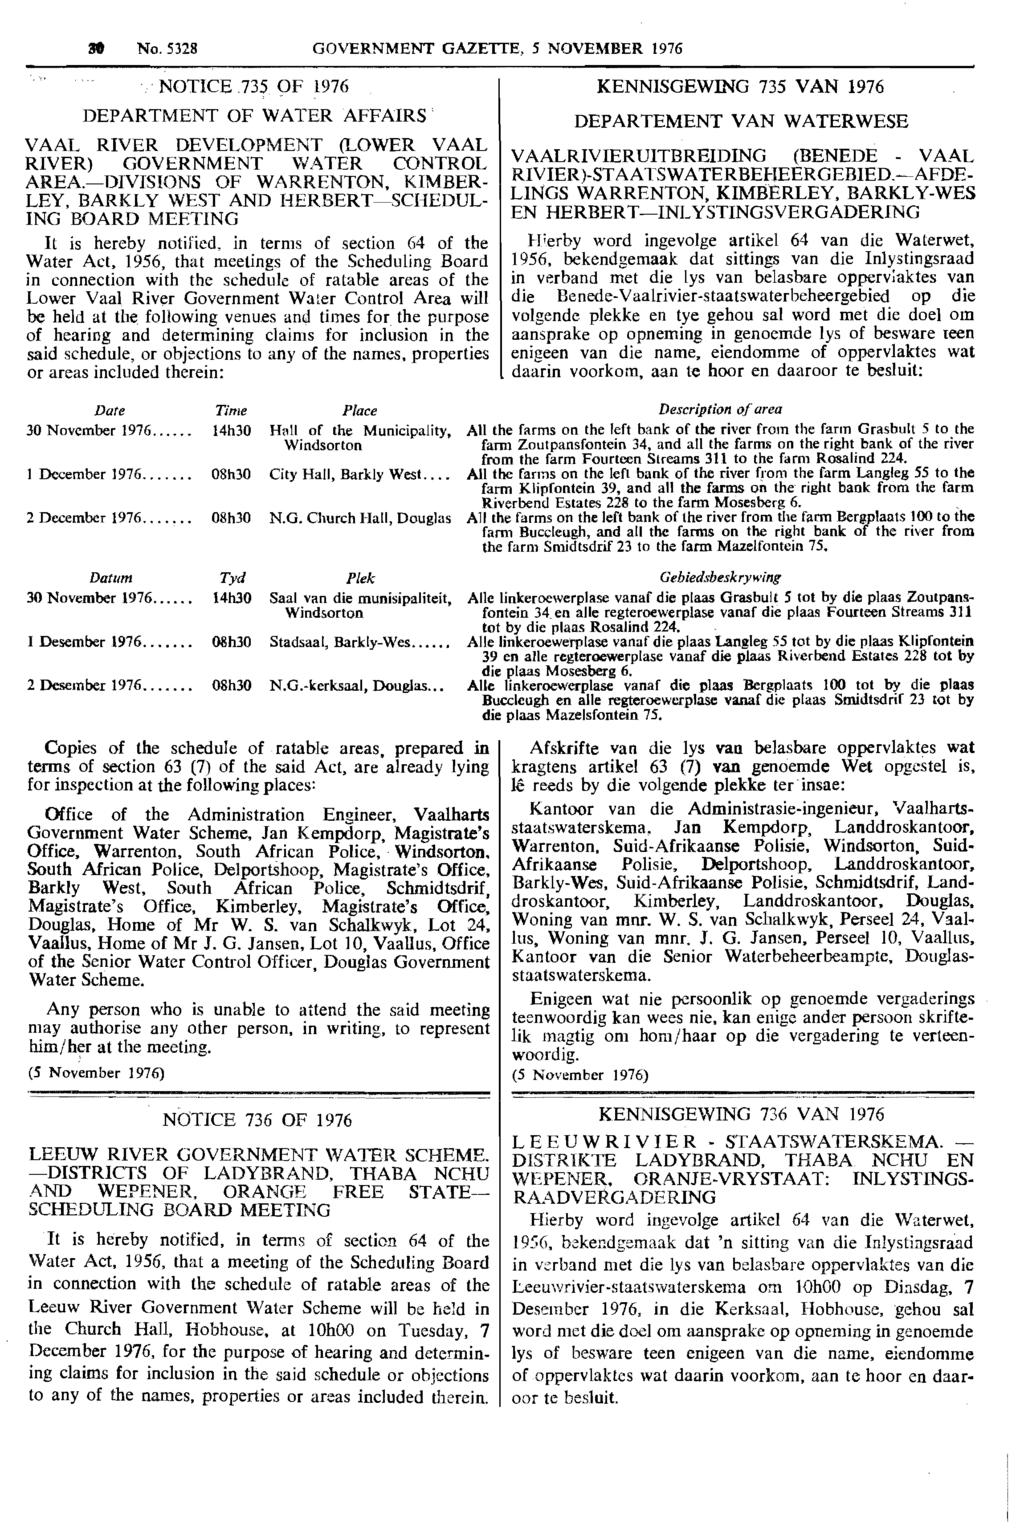 Reproduced by abinet Online in terms of Government Printer s Copyright Authority No. 10505 dated 02 February 1998 No. GOVERNMENT GAZETTE, 5 NOVEMBER 1976.